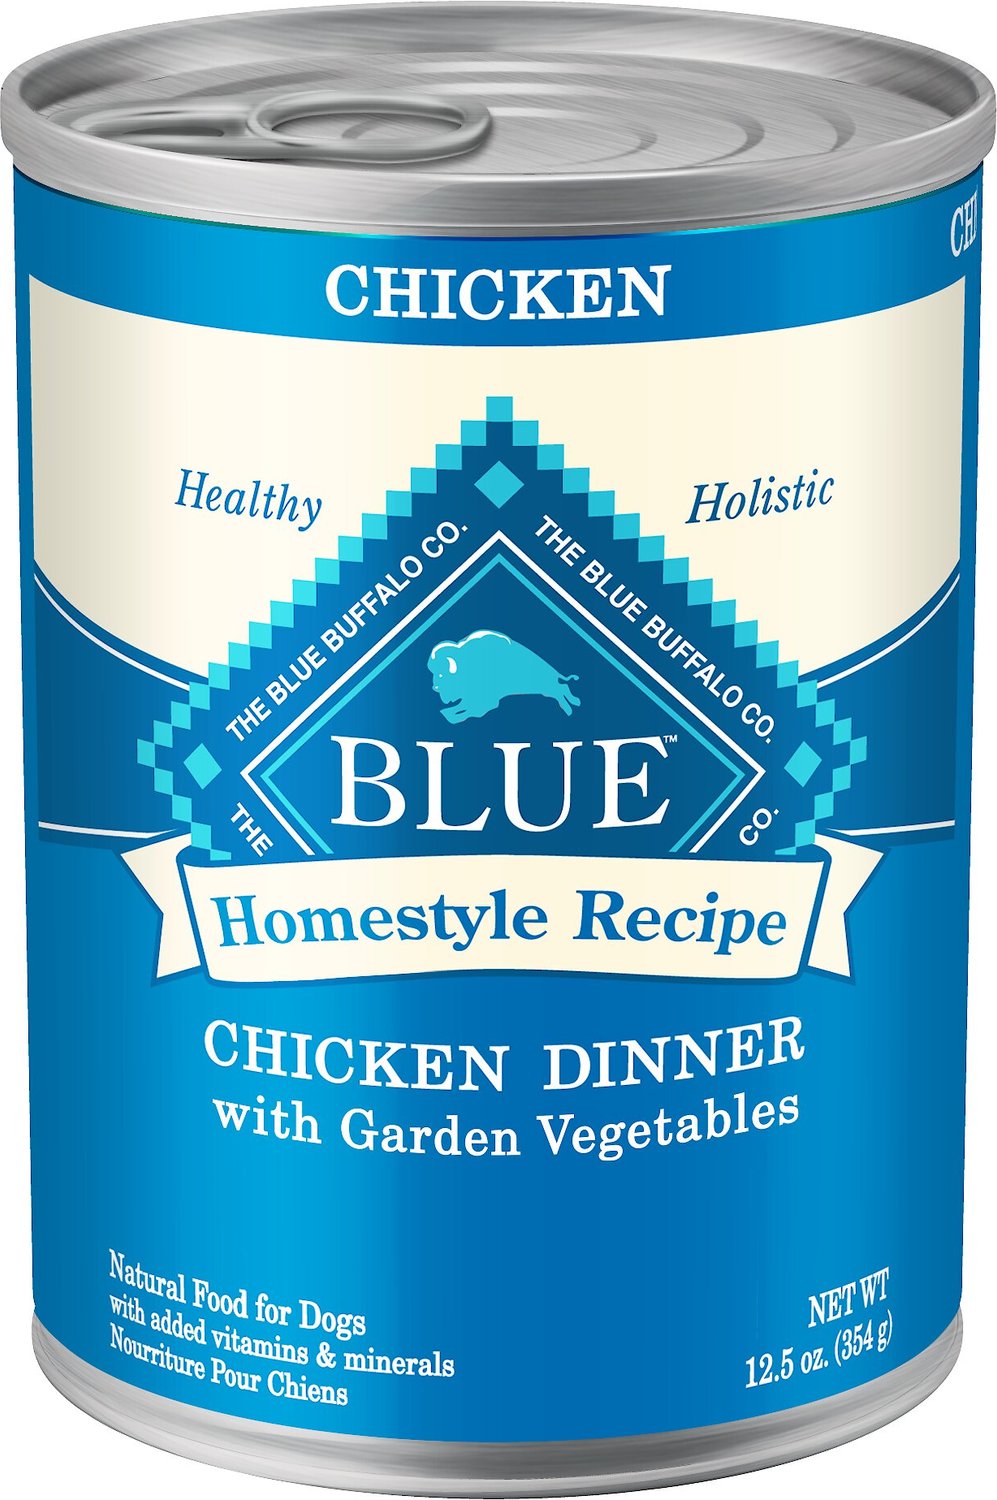 Blue Buffalo Homestyle Recipe Chicken Dinner, Garden Vegetables & Brown Rice Canned Dog Food